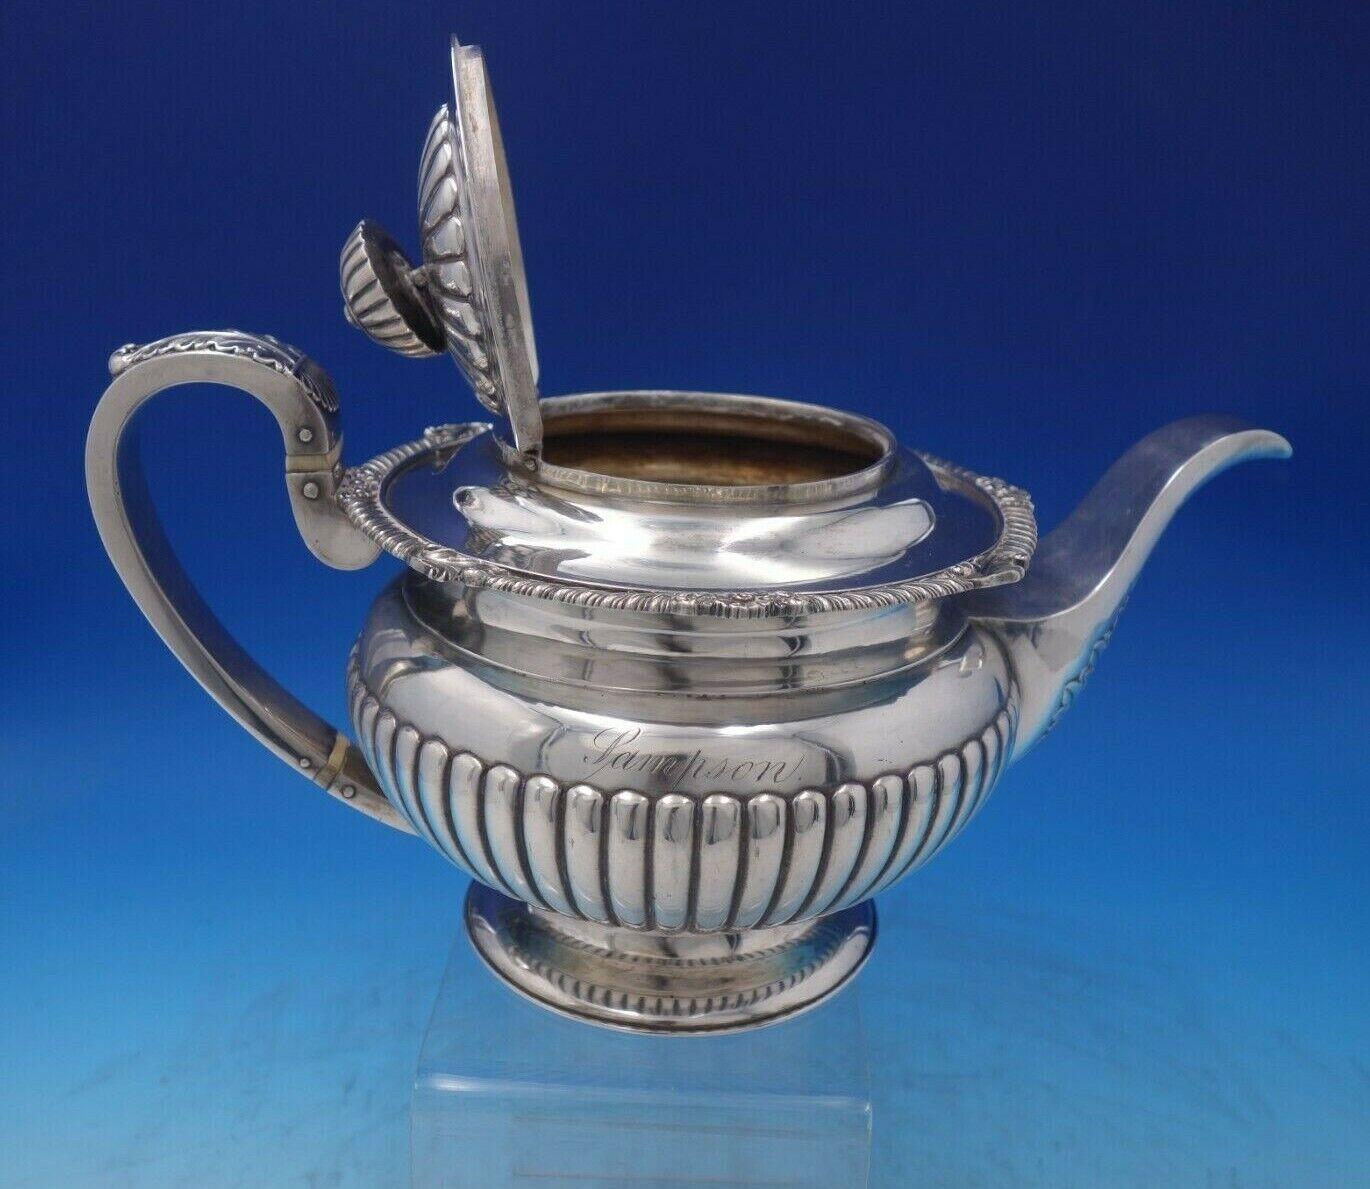 Stainless Steel Wong Shing Chinese Export Sterling Silver Tea Set 3pc c.1840-1870 '#6462' For Sale